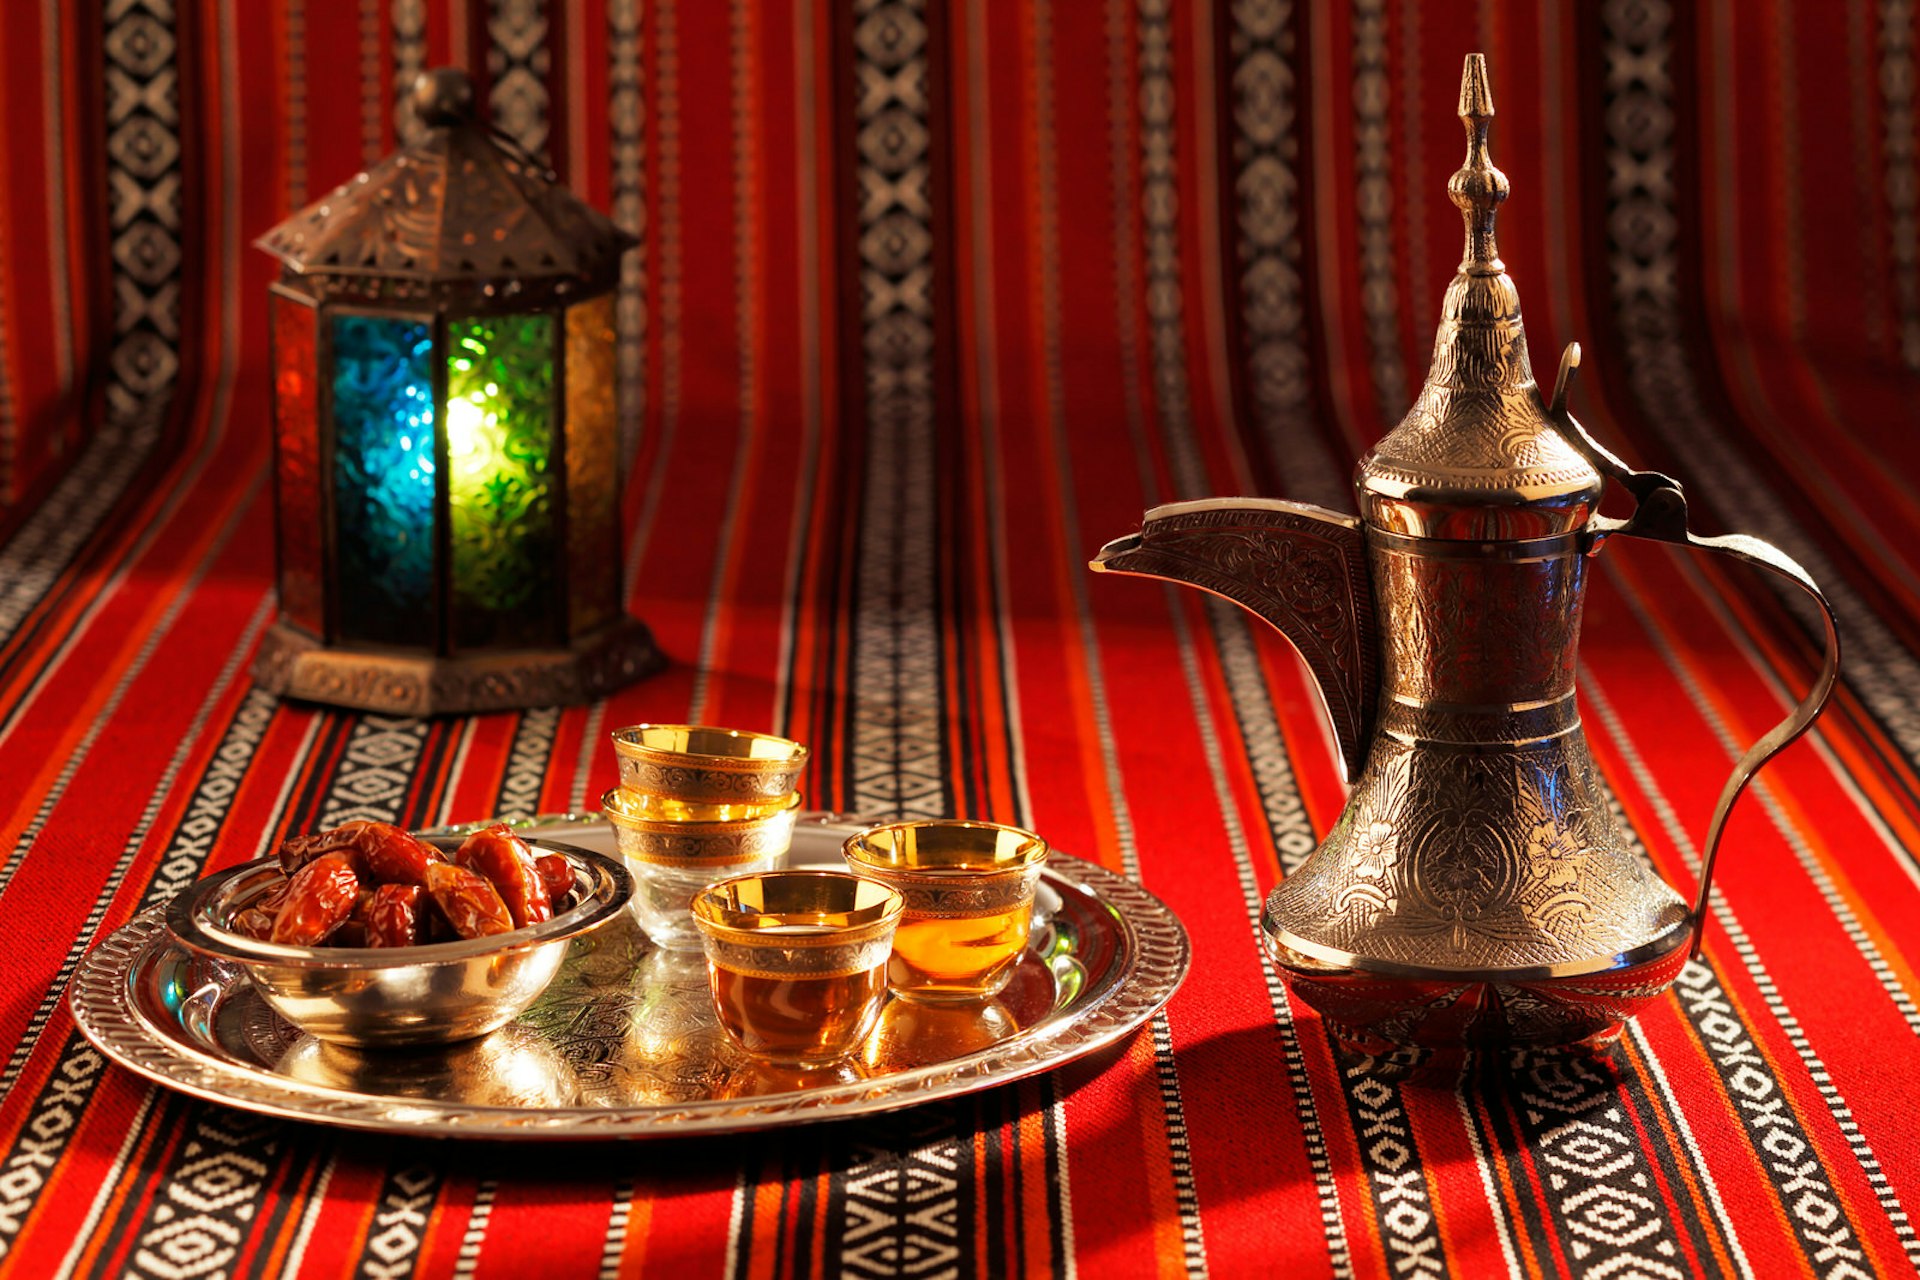 A bowl of dates and a traditional dallah coffee pot sit on Arabian-style fabric